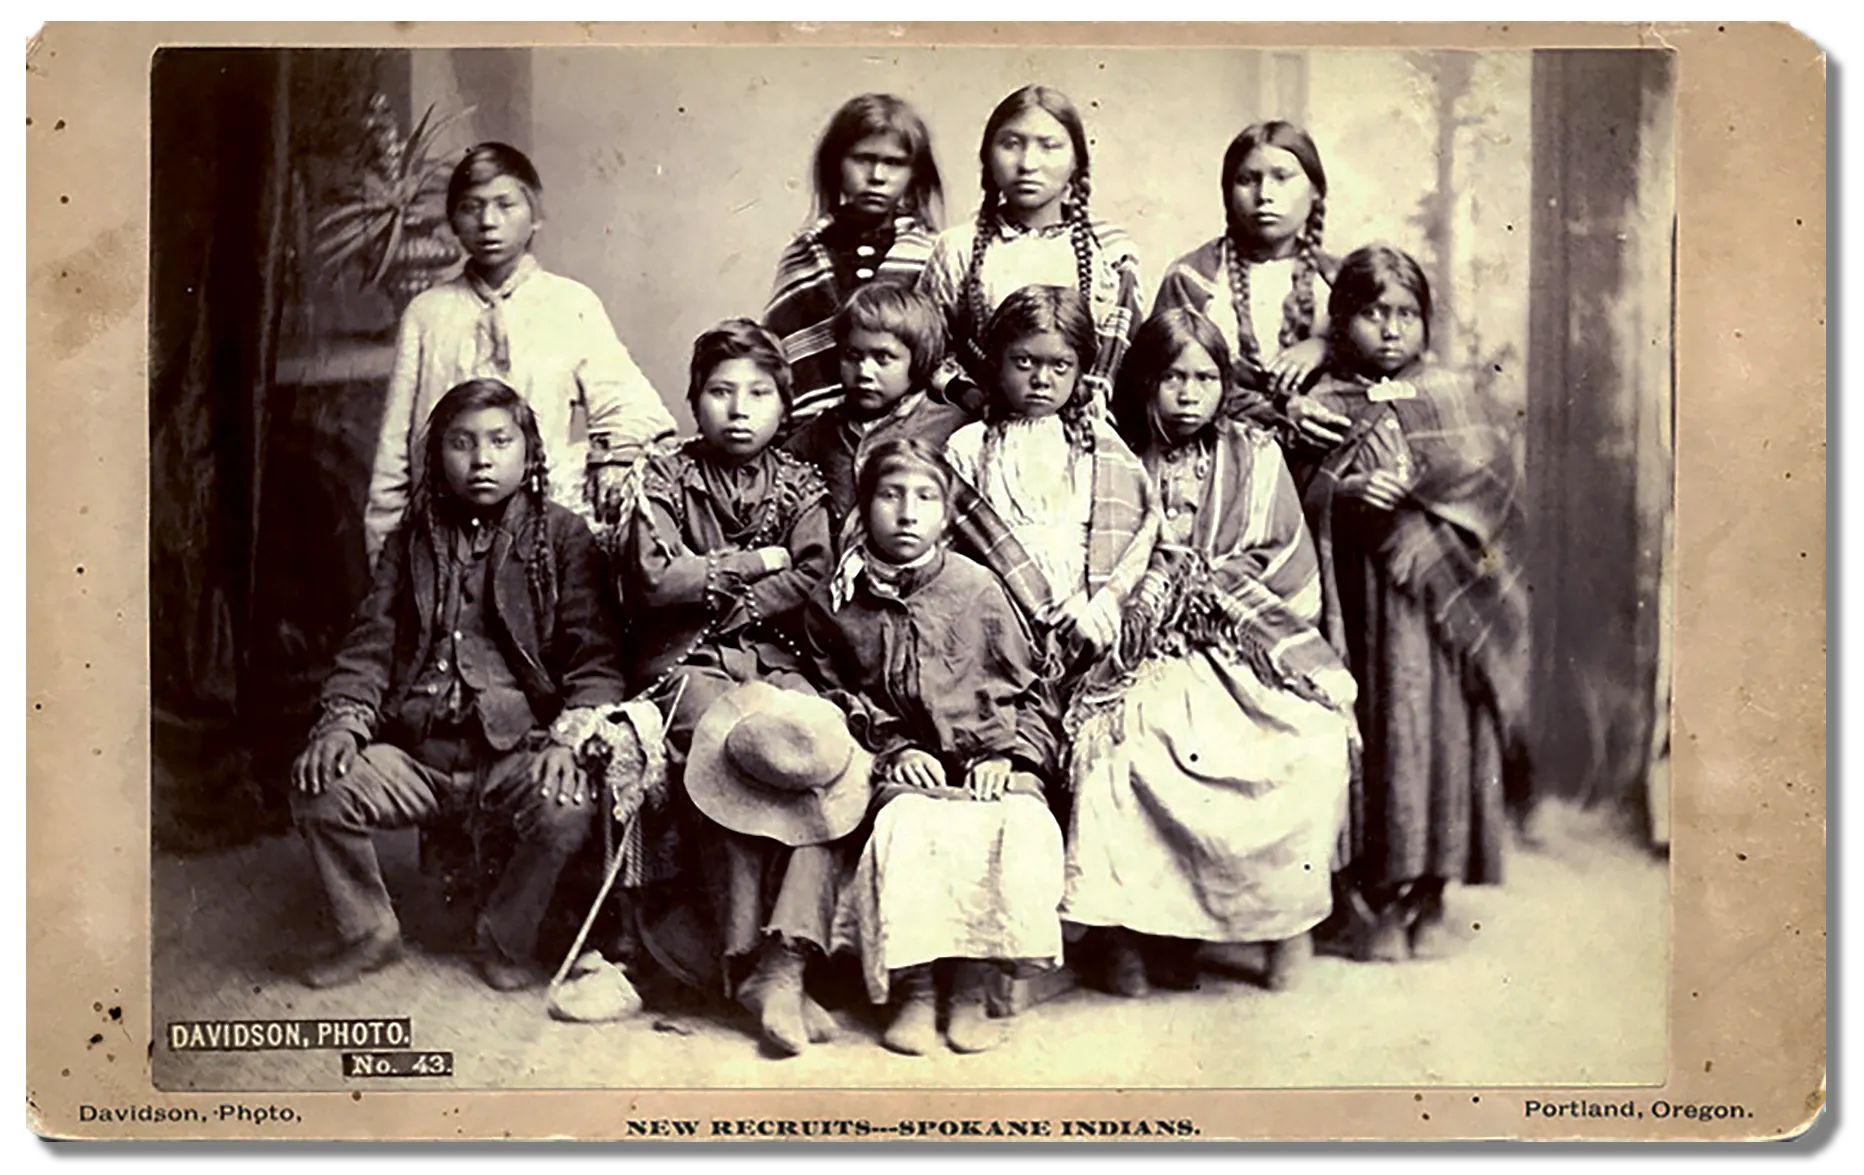 Eleven young students from the Spokane tribe are gathered together for a photo, fear and distrust is evident in their facial expressions.